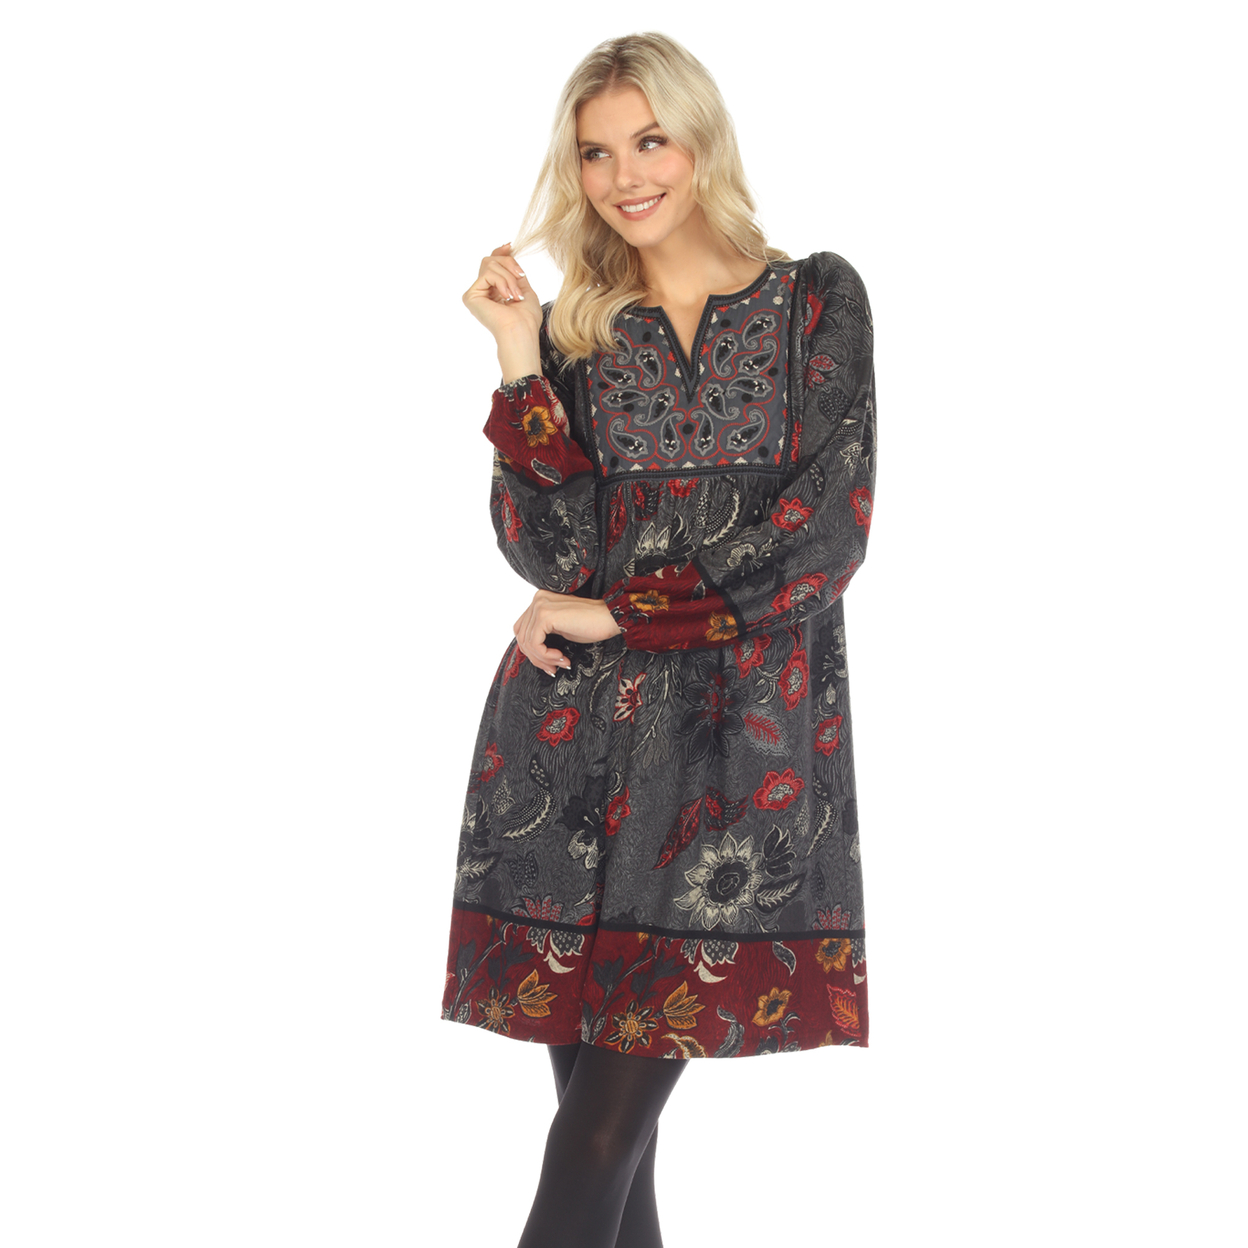 White Mark Women's Floral Paisley Sweater Dress - Grey/red, X-large